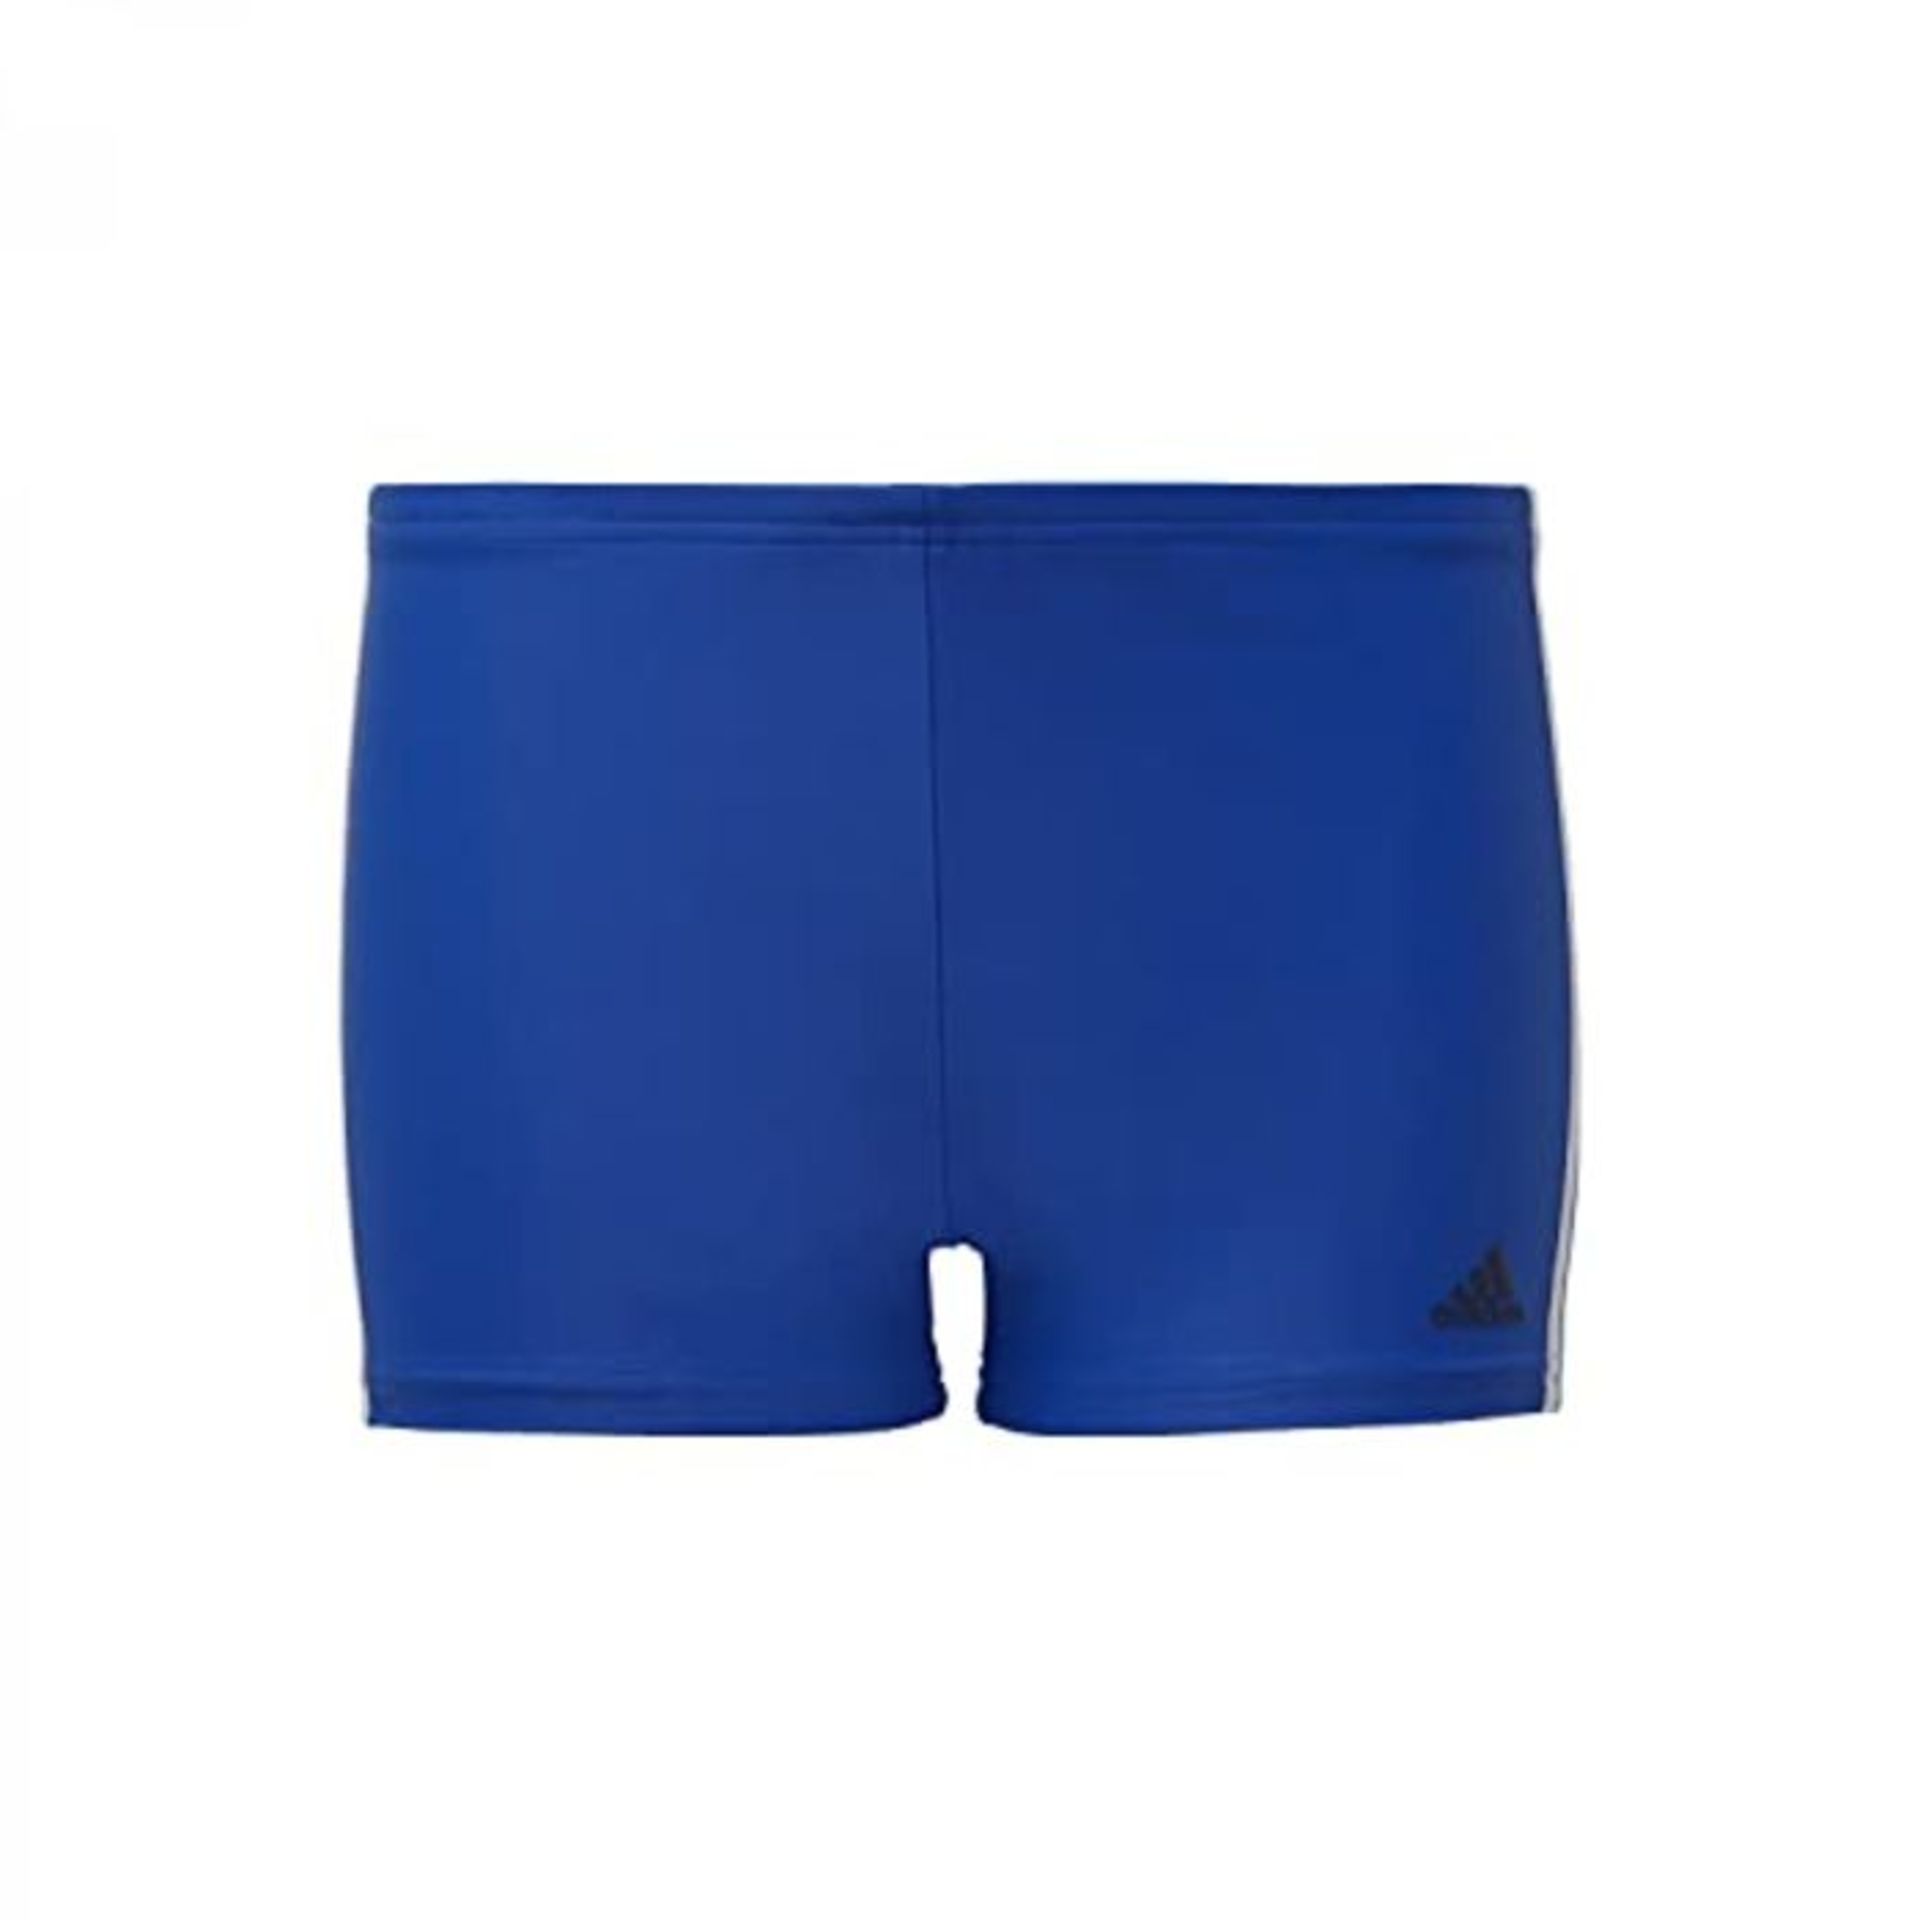 adidas Fit Bx 3S Y Swimsuit - Team Royal Blue/White, 910Y